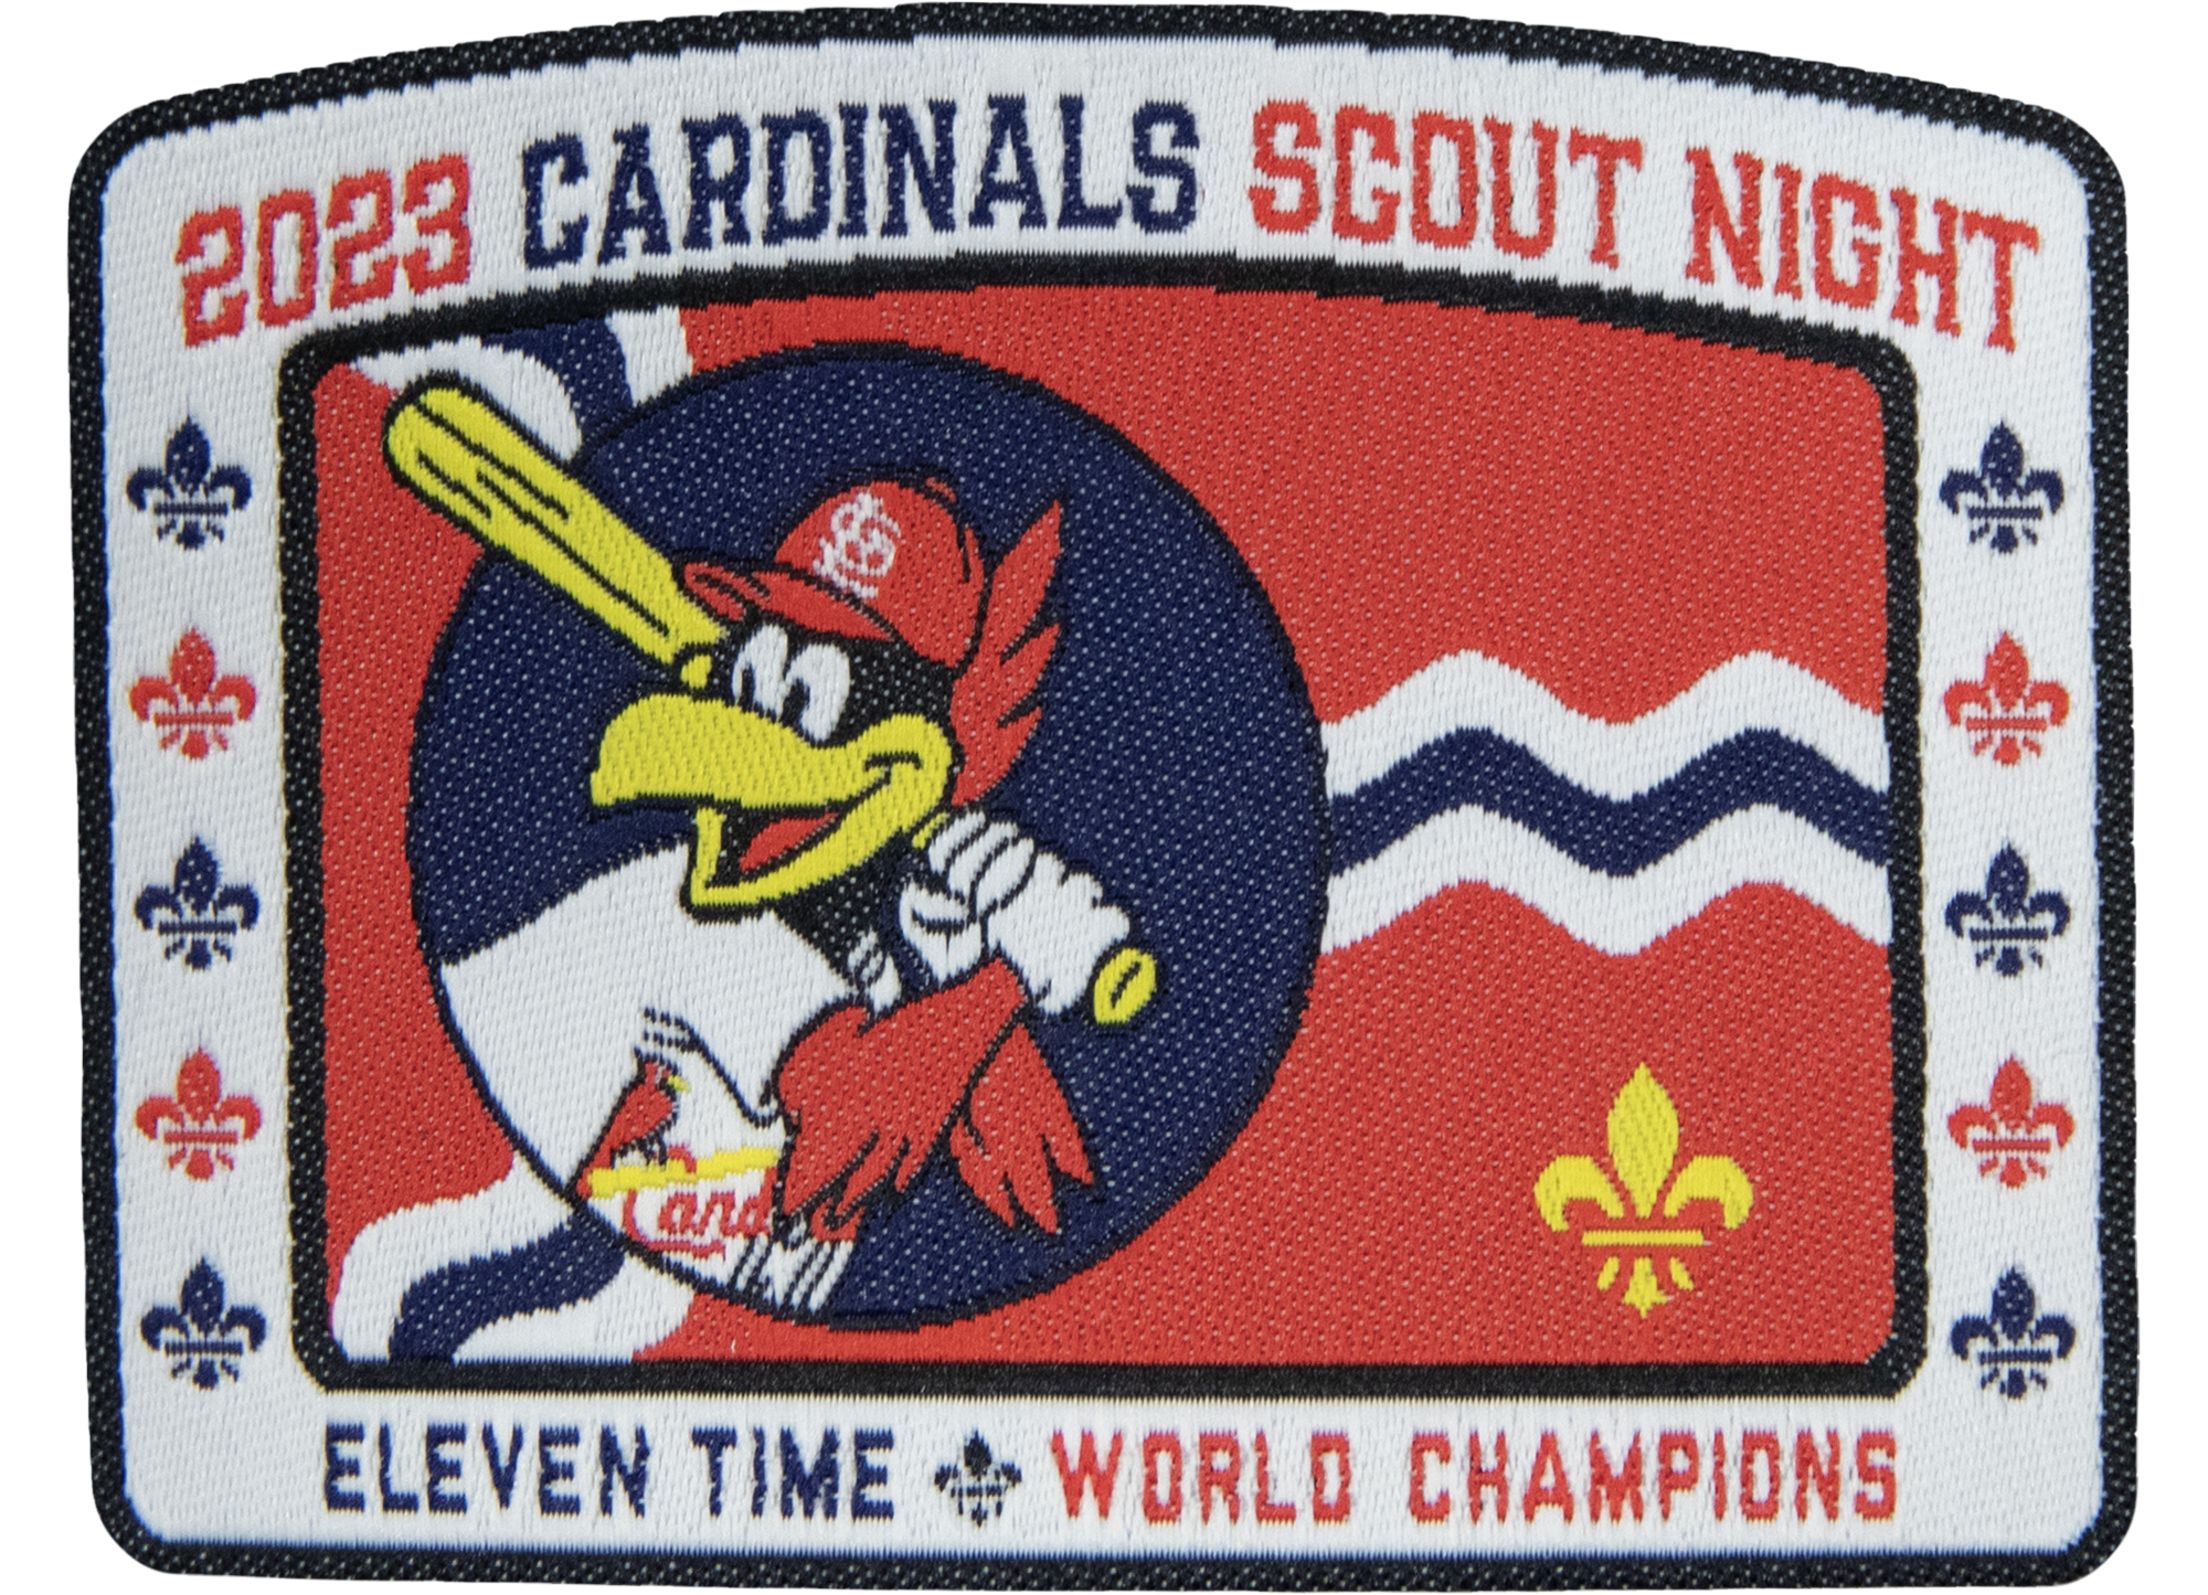 St+Louis+Cardinals+Embroidered+Team+Logo+Collectible+Patch for sale online